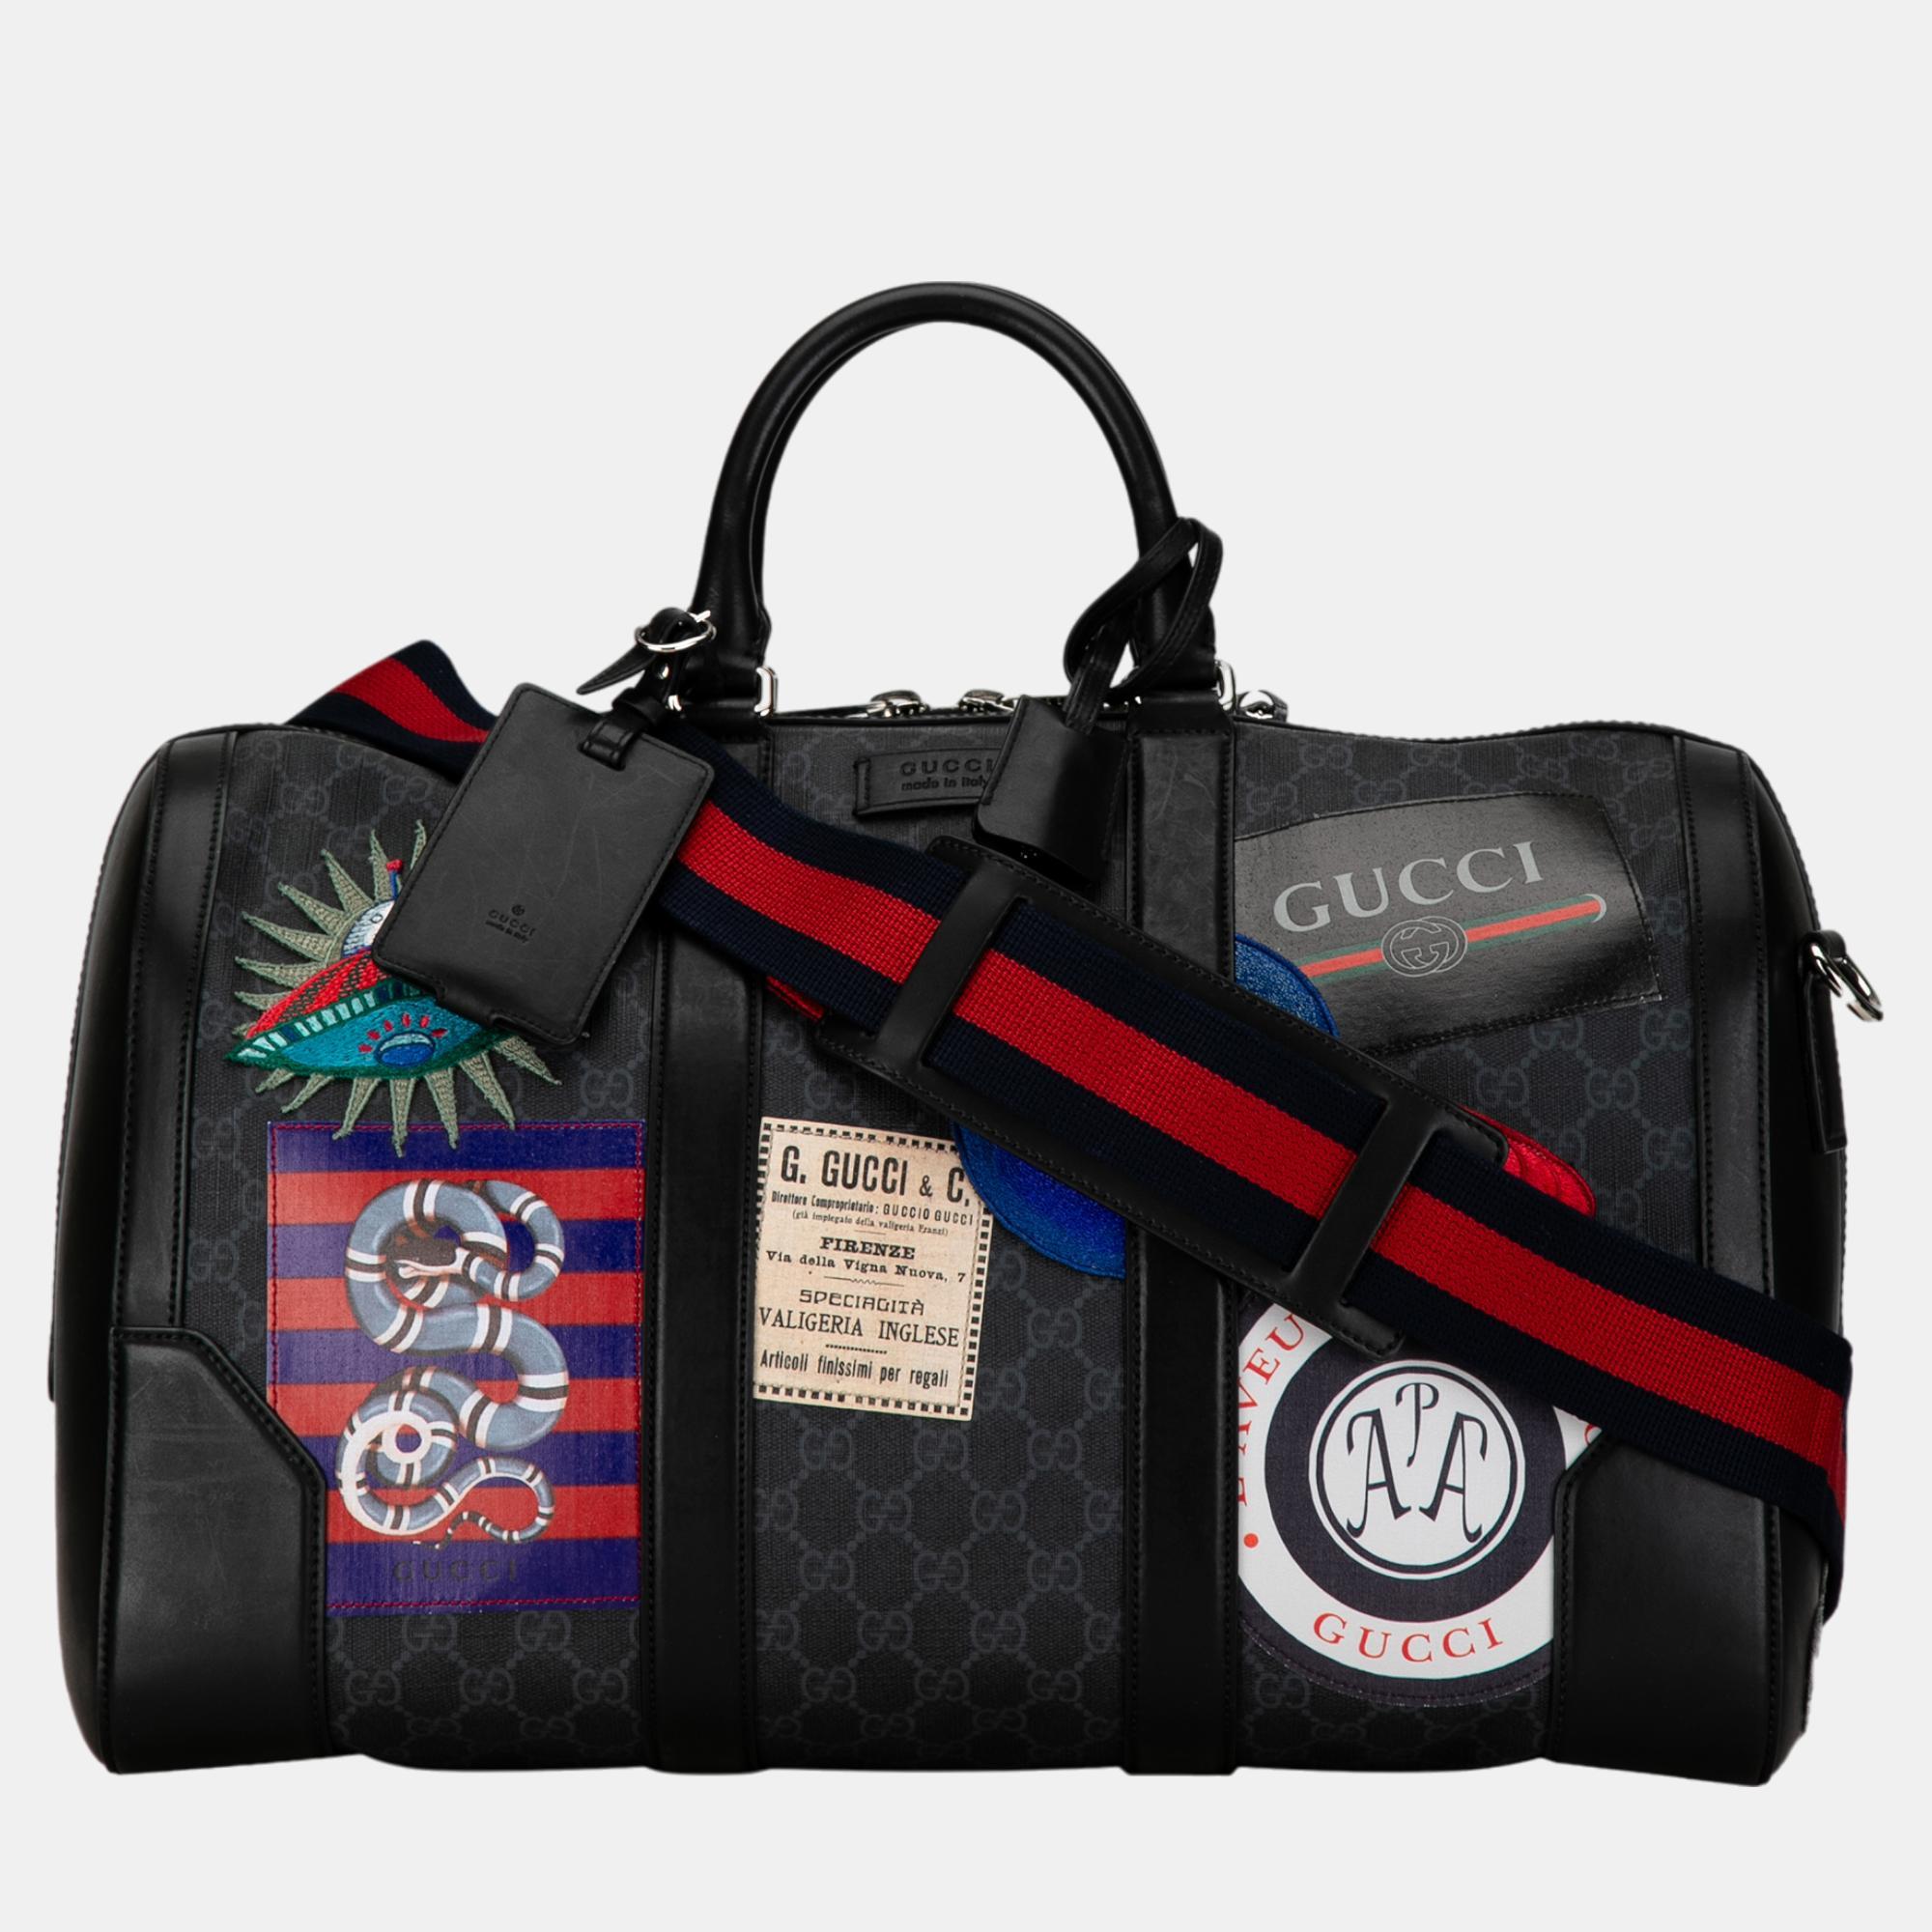 Pre-owned Gucci Black Gg Supreme Night Courrier Travel Bag